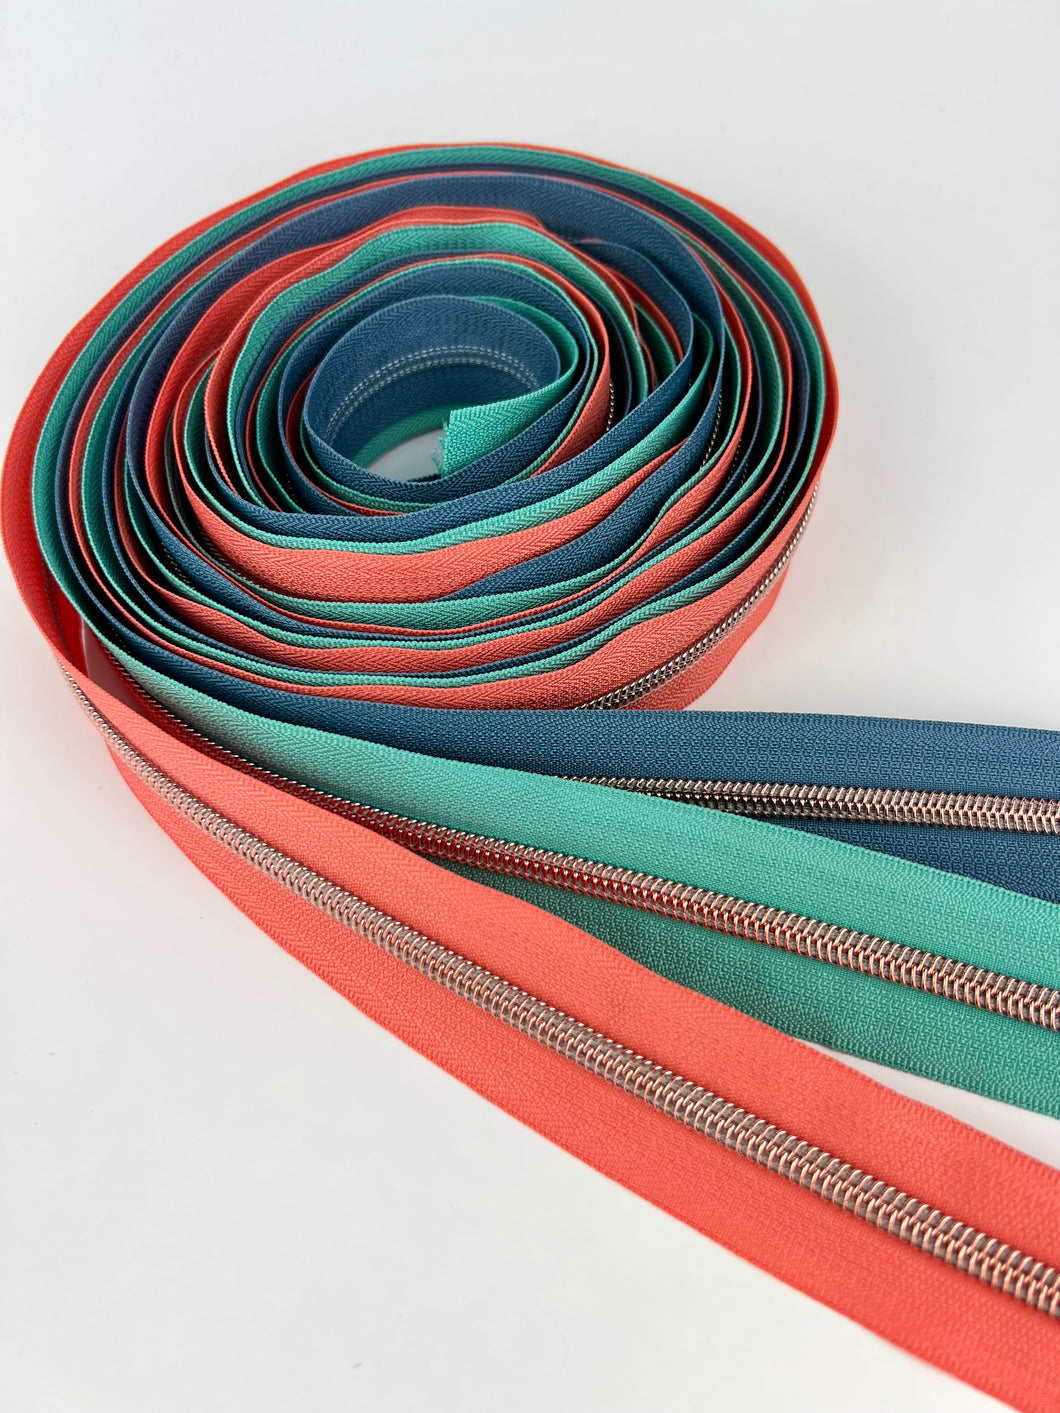 #5 Nylon Zipper Pack- Coral/Teal/Dusty Blue Combo